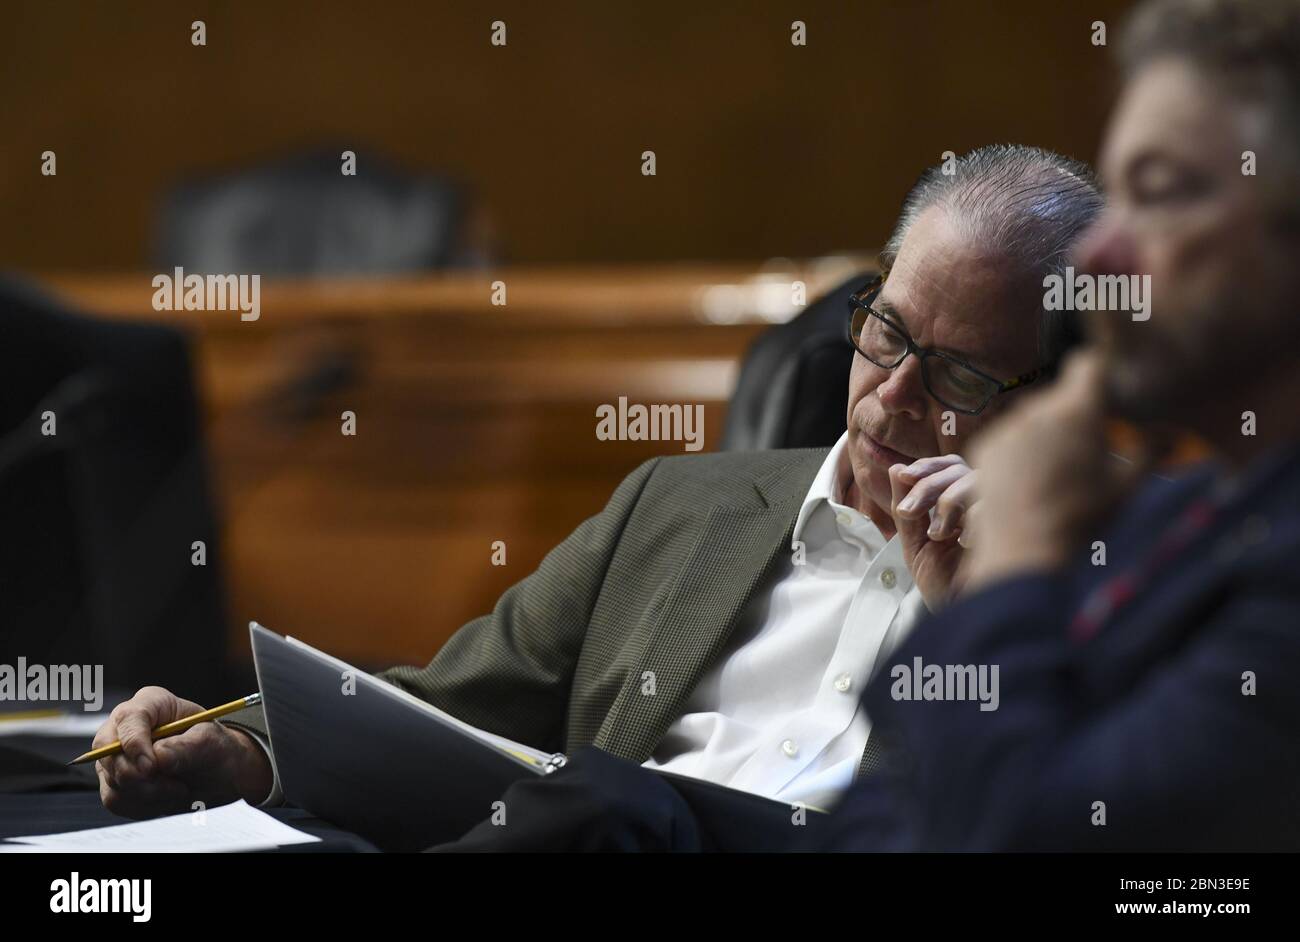 Washington, United States. 12th May, 2020. U.S. Senator Mike Braun (R-IN) takes notes as he listens to testimony during the Senate Committee for Health, Education, Labor, and Pensions hearing to examine COVID-19 and Safely Getting Back to Work and Back to School on Tuesday, May 12, 2020, on Capitol Hill in Washington, DC. Pool Photo by Toni L. Stock Photo